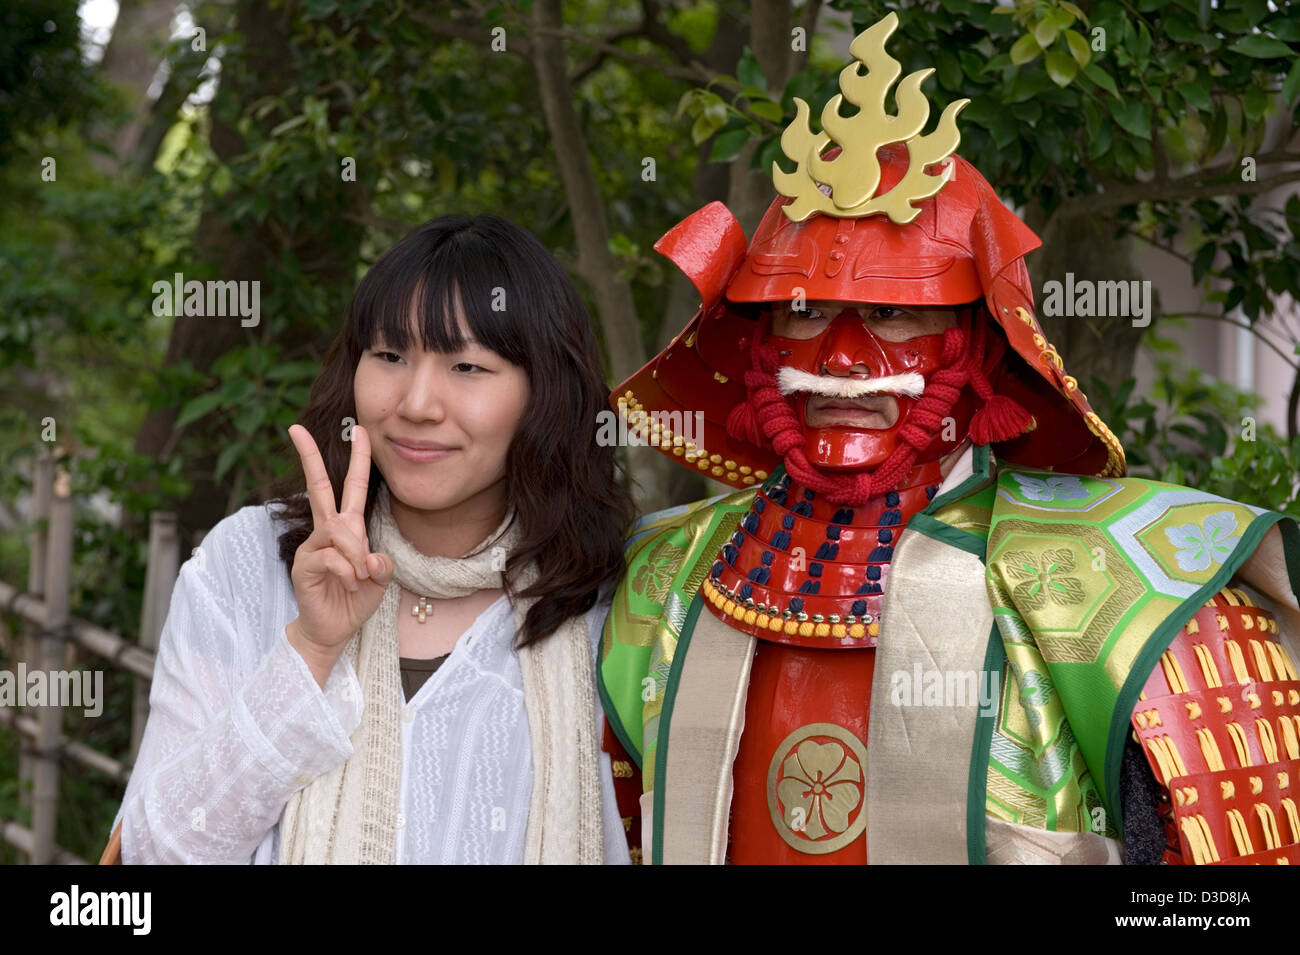 Actor in theatrical-looking, semi-modern samurai costume hired to pose for photos at local festival in Odawara, Kanagawa, Japan. Stock Photo